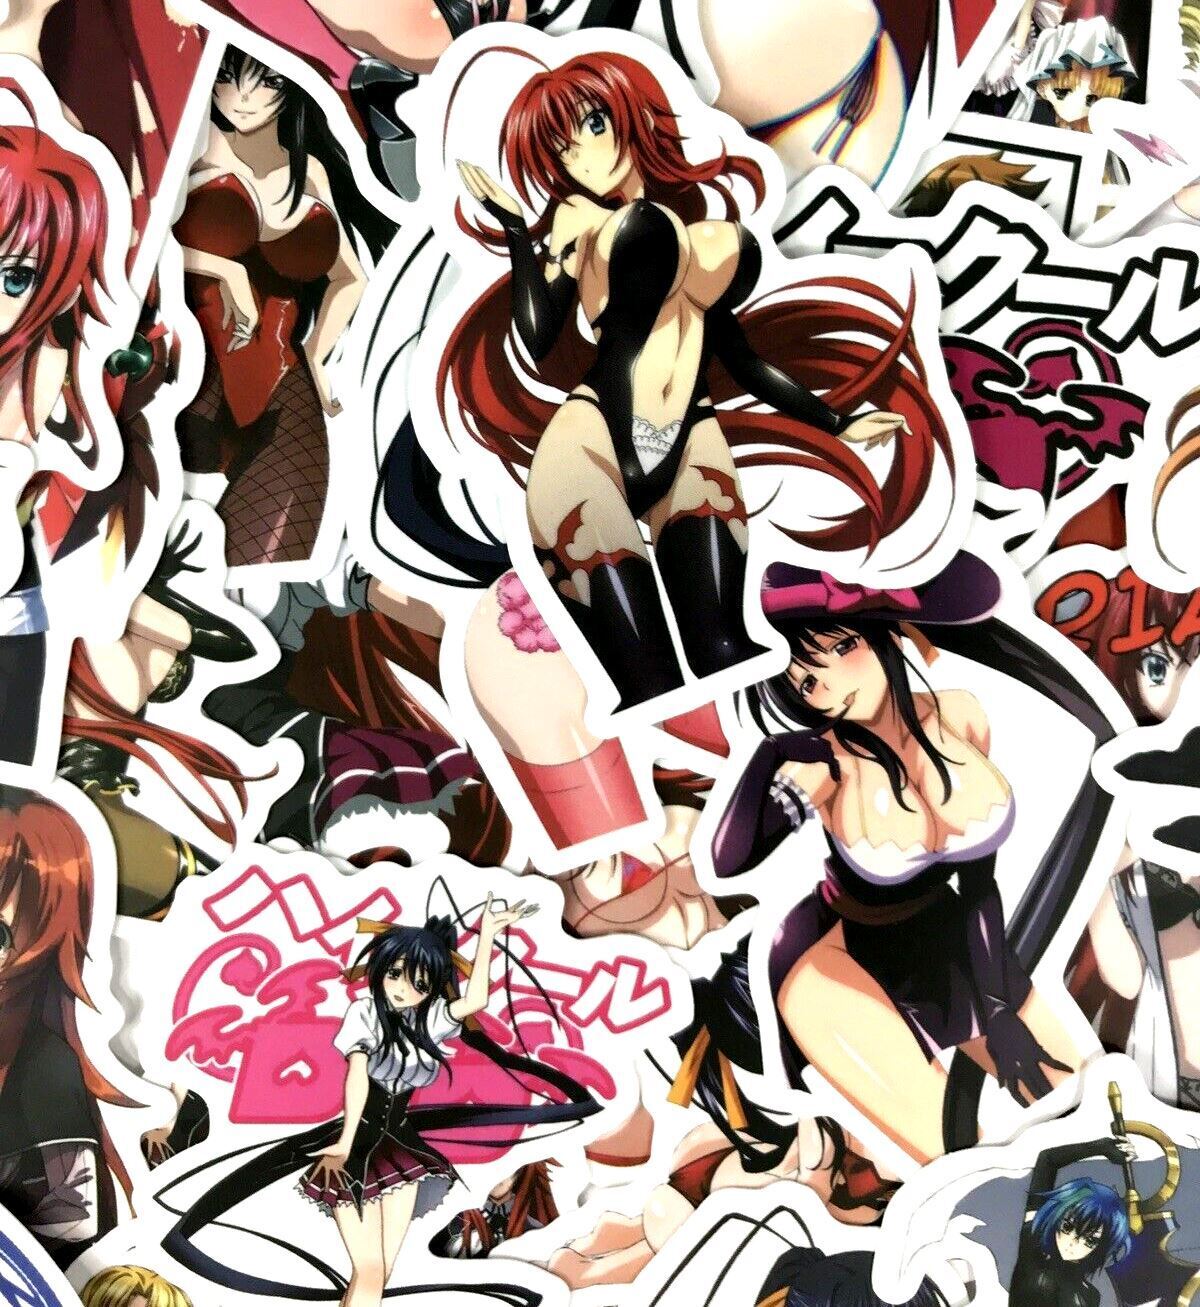 100pc High School DxD Waifu Sexy Anime Phone Laptop XBOX PS Decal Sticker Pack